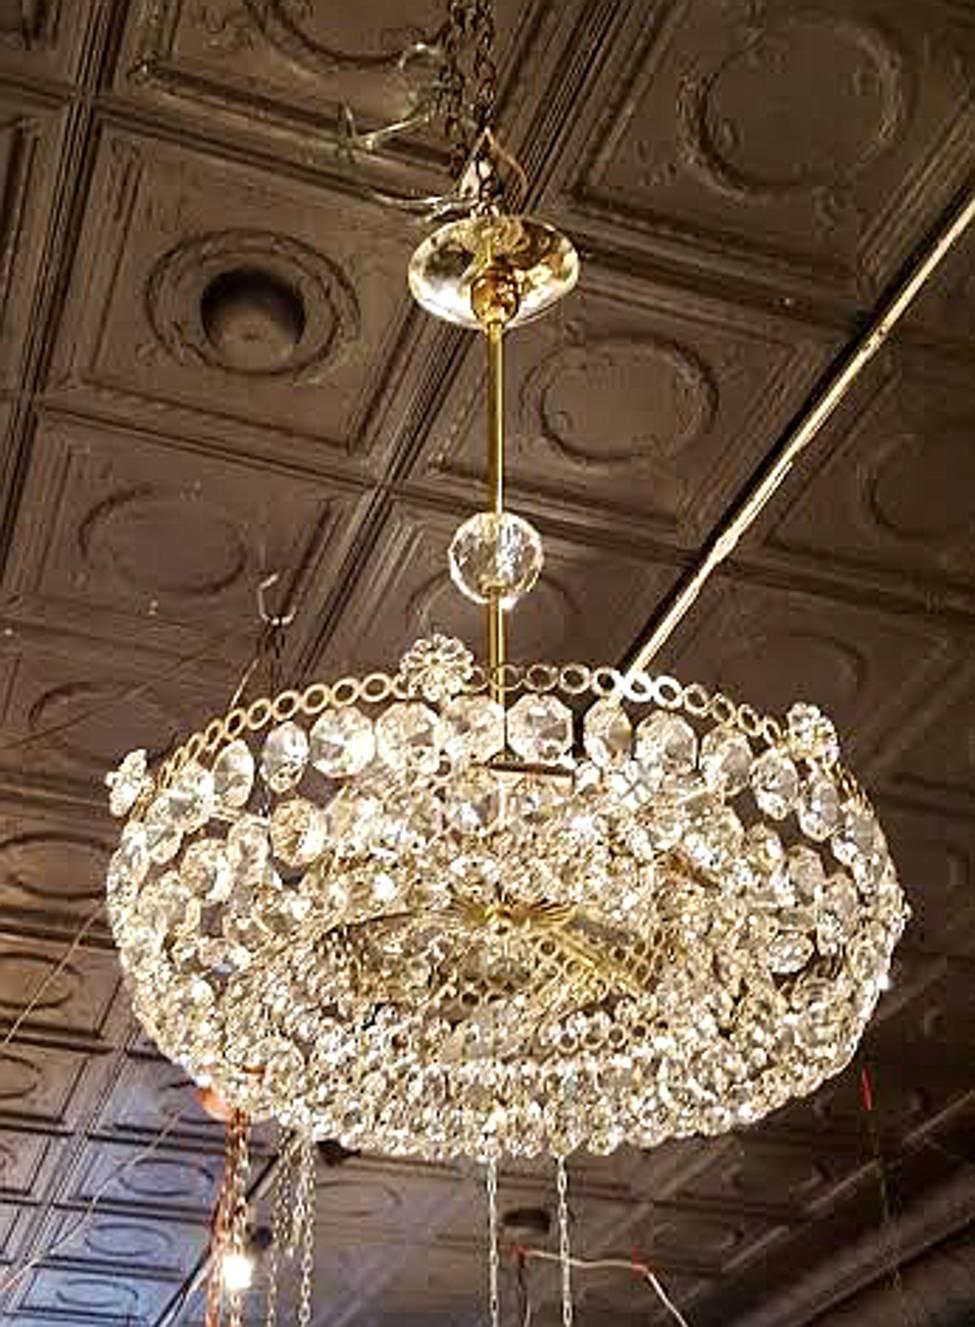 Great design and of the highest quality. Solid frame castings and very bright crystals make up this showstopper. 
All new wiring, takes six chandelier base bulbs max 60 watts each.

Perfect size for any application.